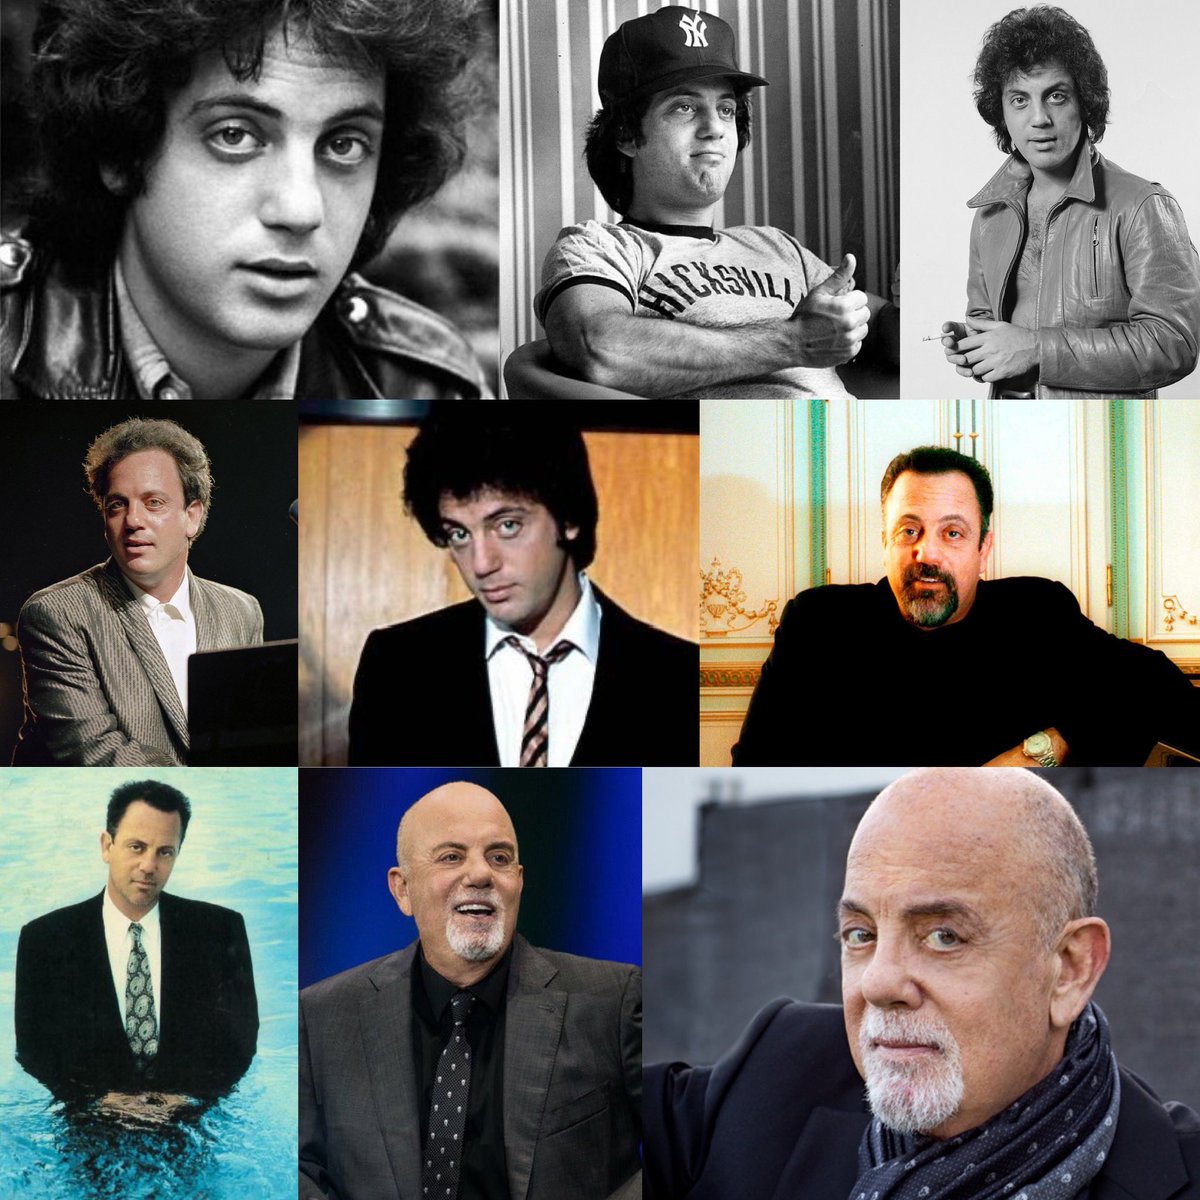 Happy 75th Birthday! Billy Joel (born May 9, 1949) Commonly nicknamed the 'Piano Man' after his signature 1973 song of the same name, Joel has had a successful music career as a solo artist since the 1970s. 
#the80srule #the80s #OnThisDay #birthdaycelebration #BillyJoel